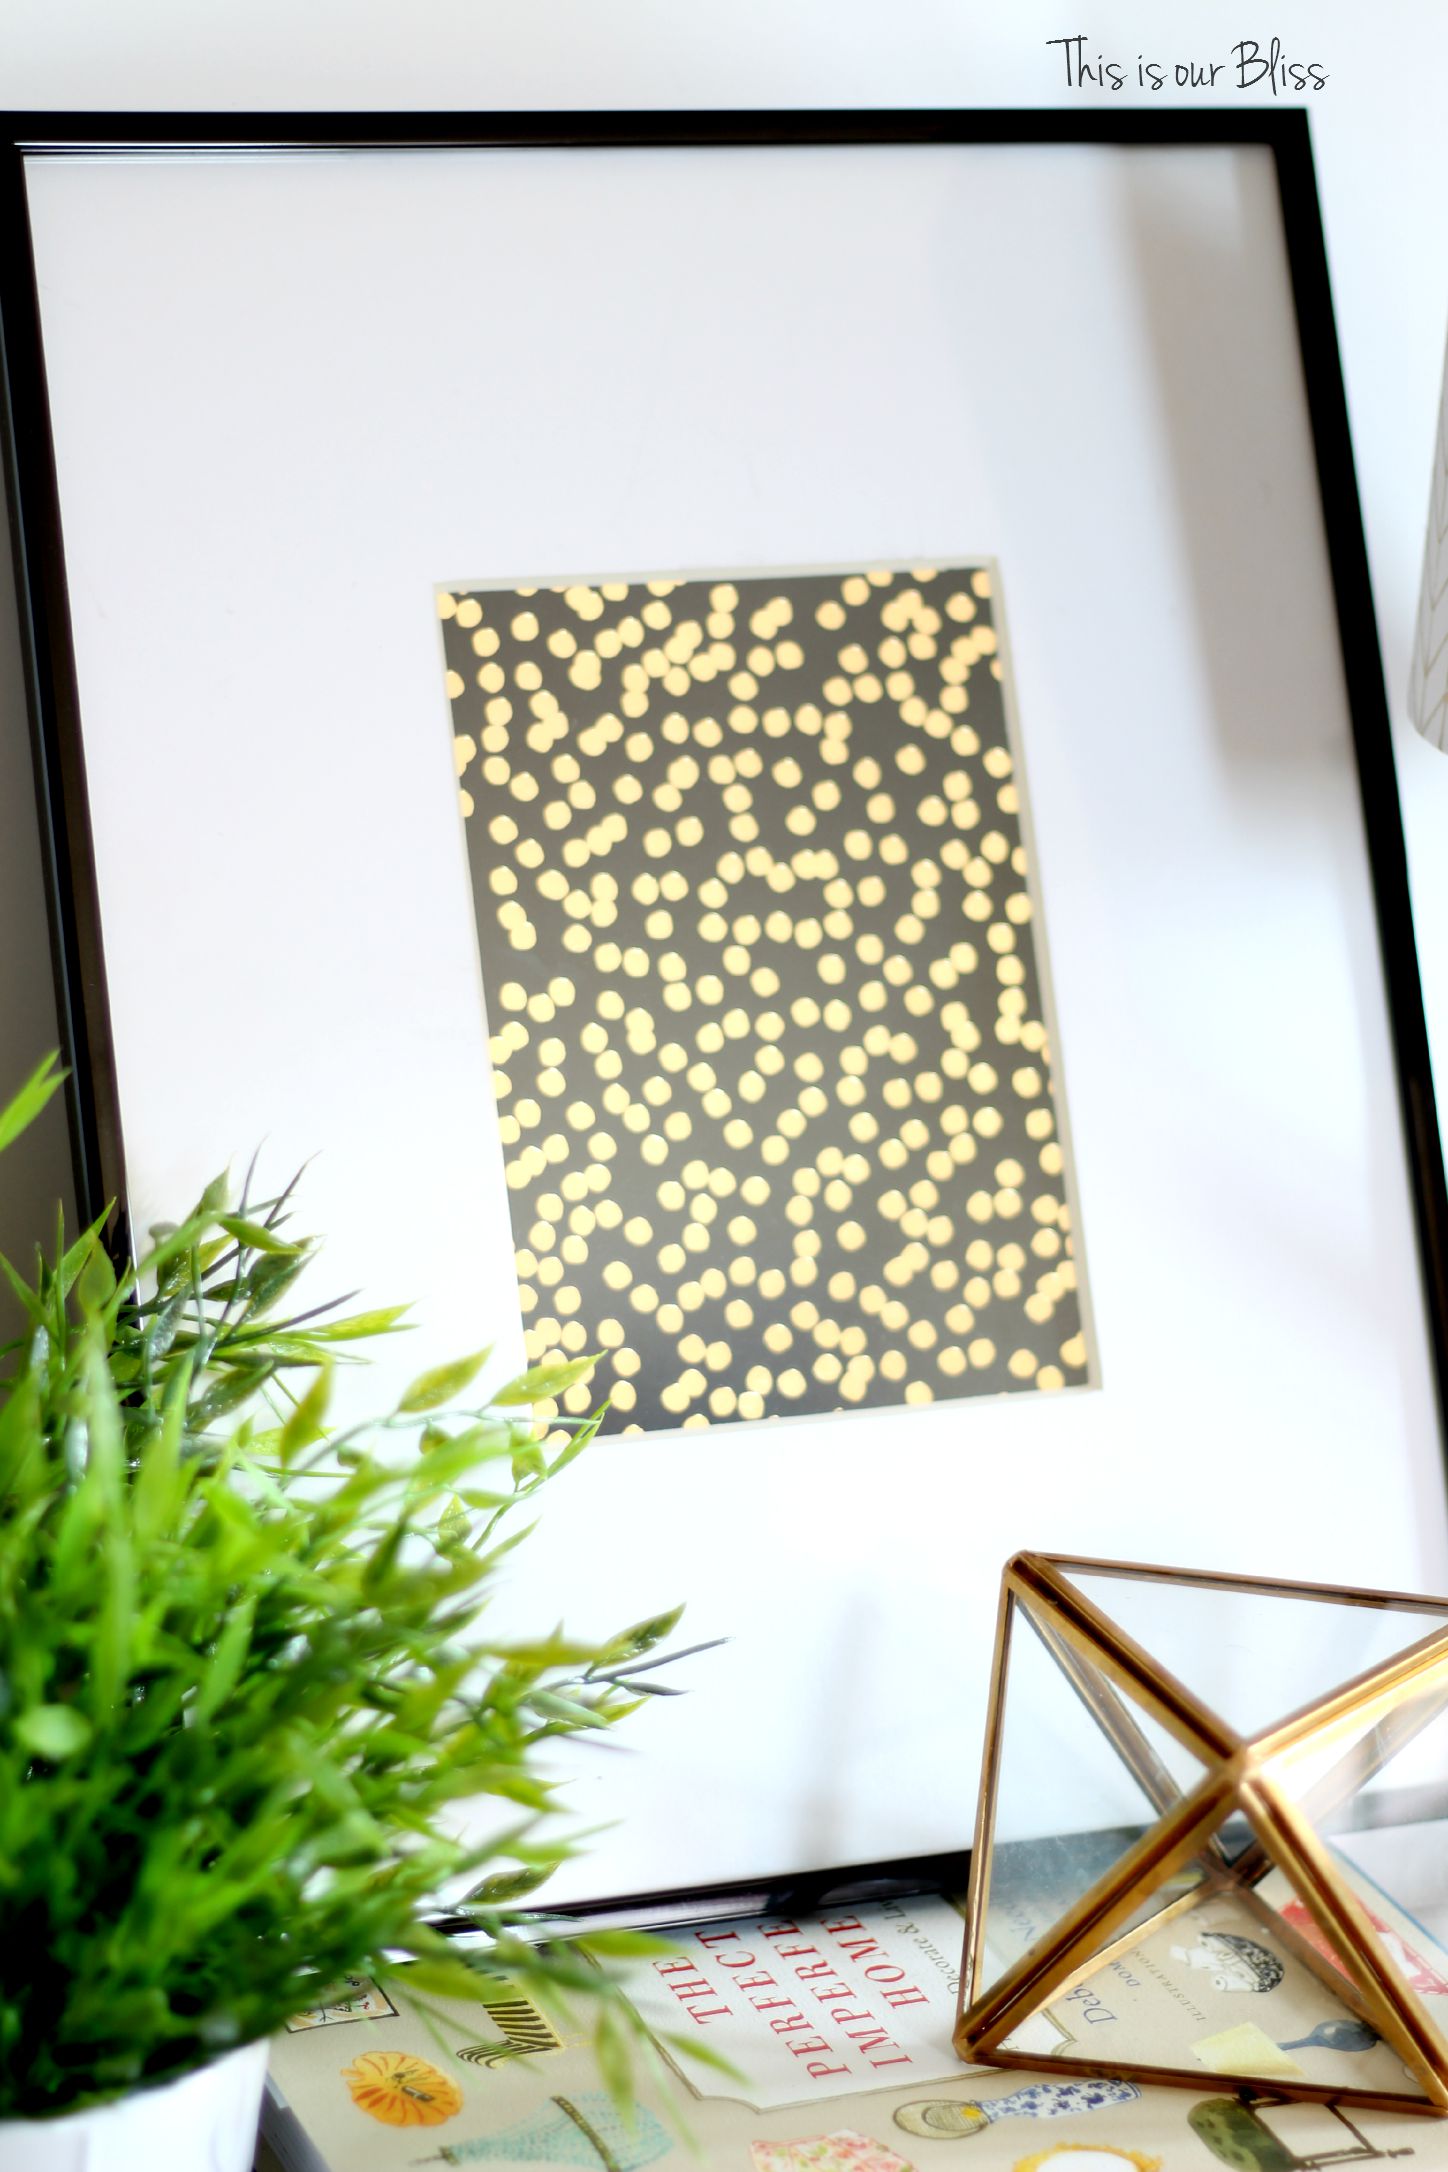 black & gold foil polka dot journal turned art - guestroom art - gallery wall - vignette - This is our Bliss